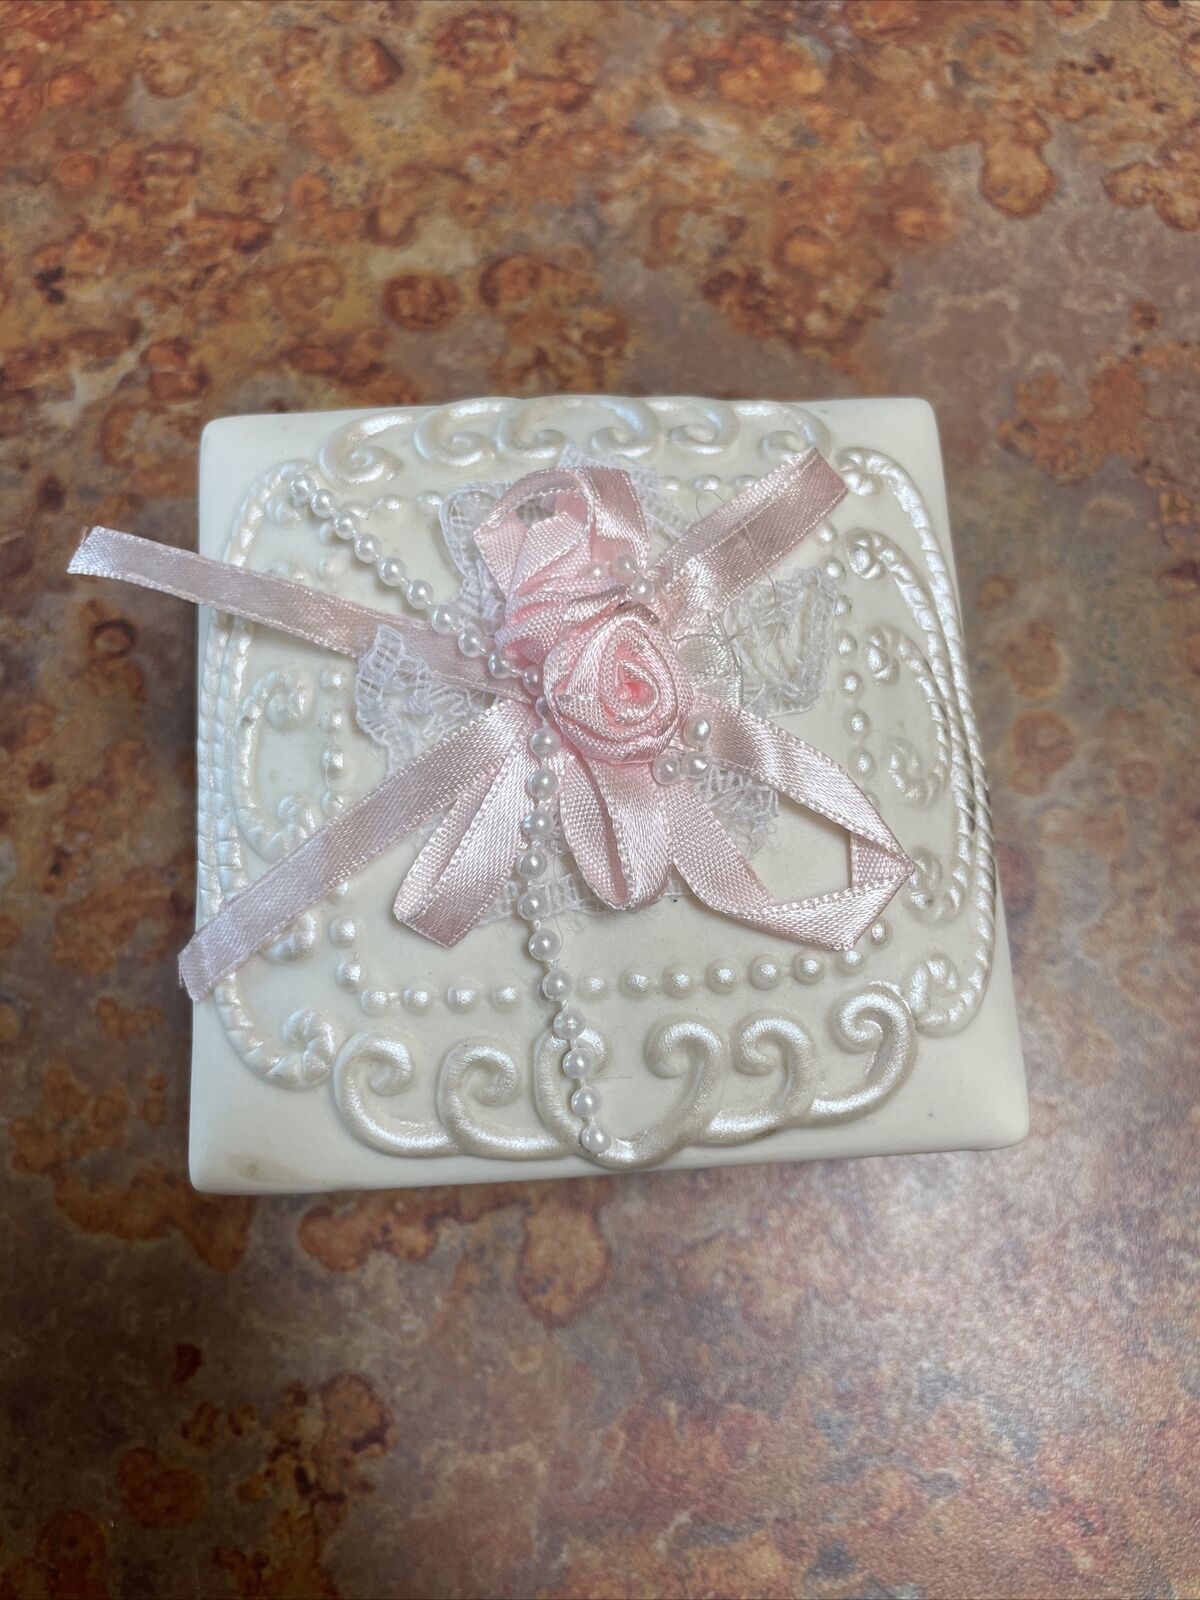 Ceramic jewelry box faux pearls lace ribbon rose floral vintage